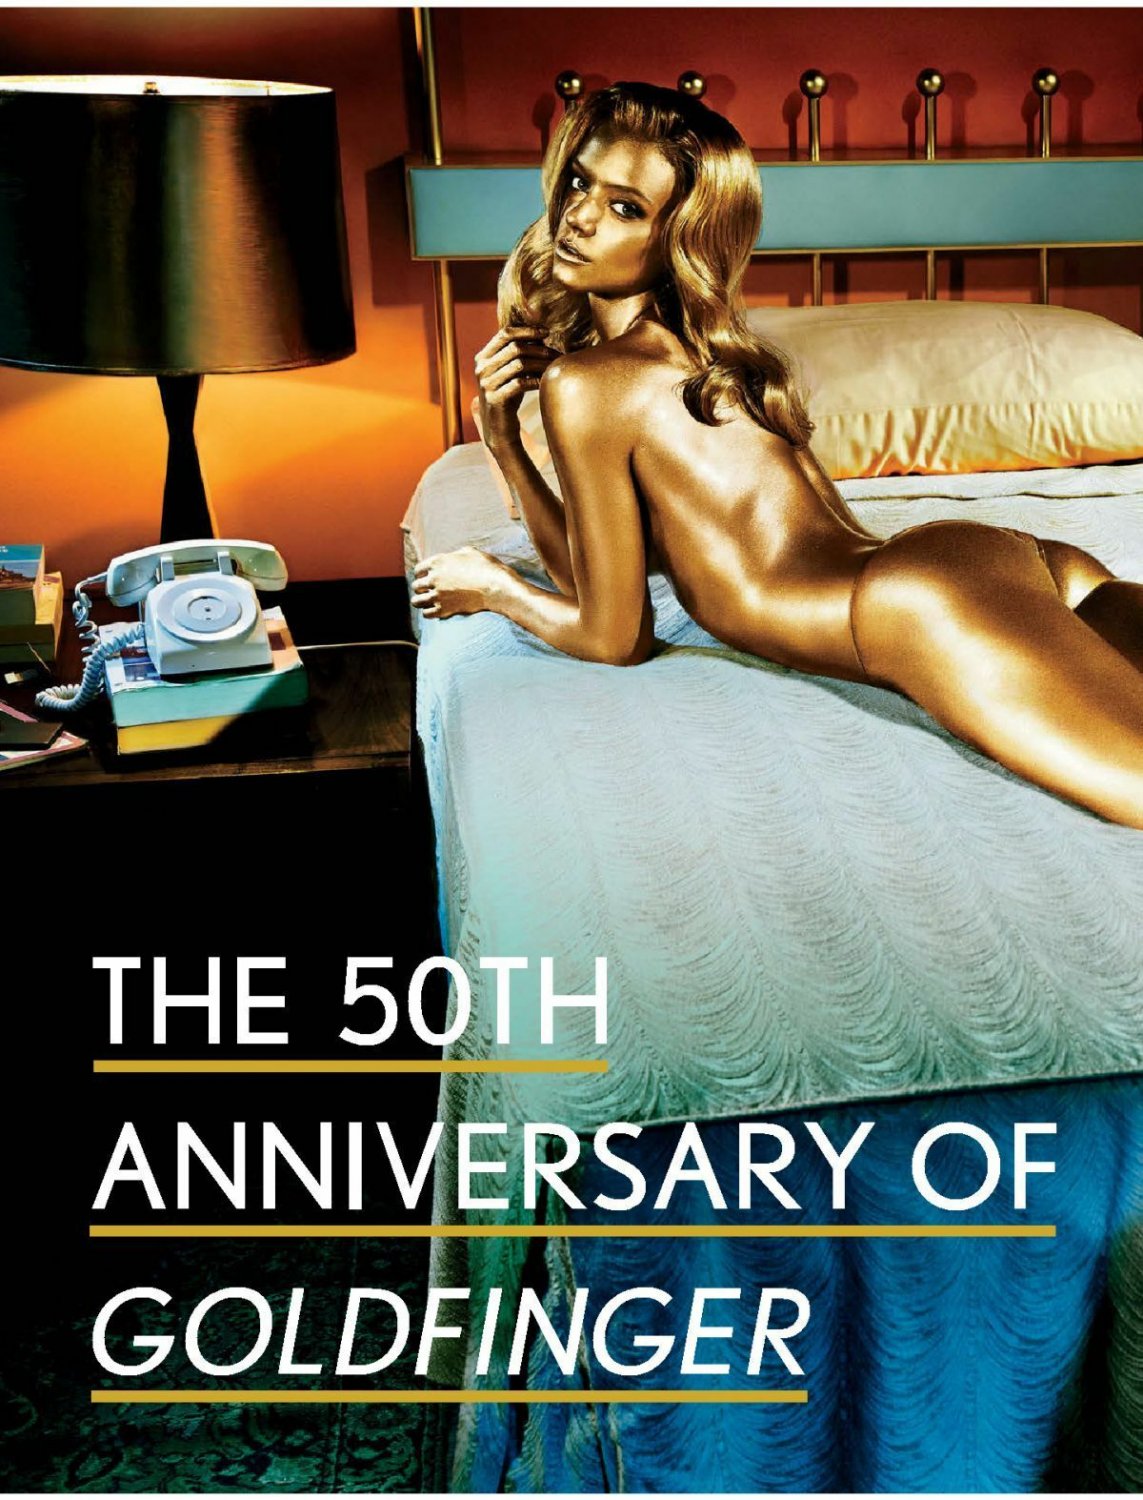 Goldfinger Style B Movie Poster 13x19